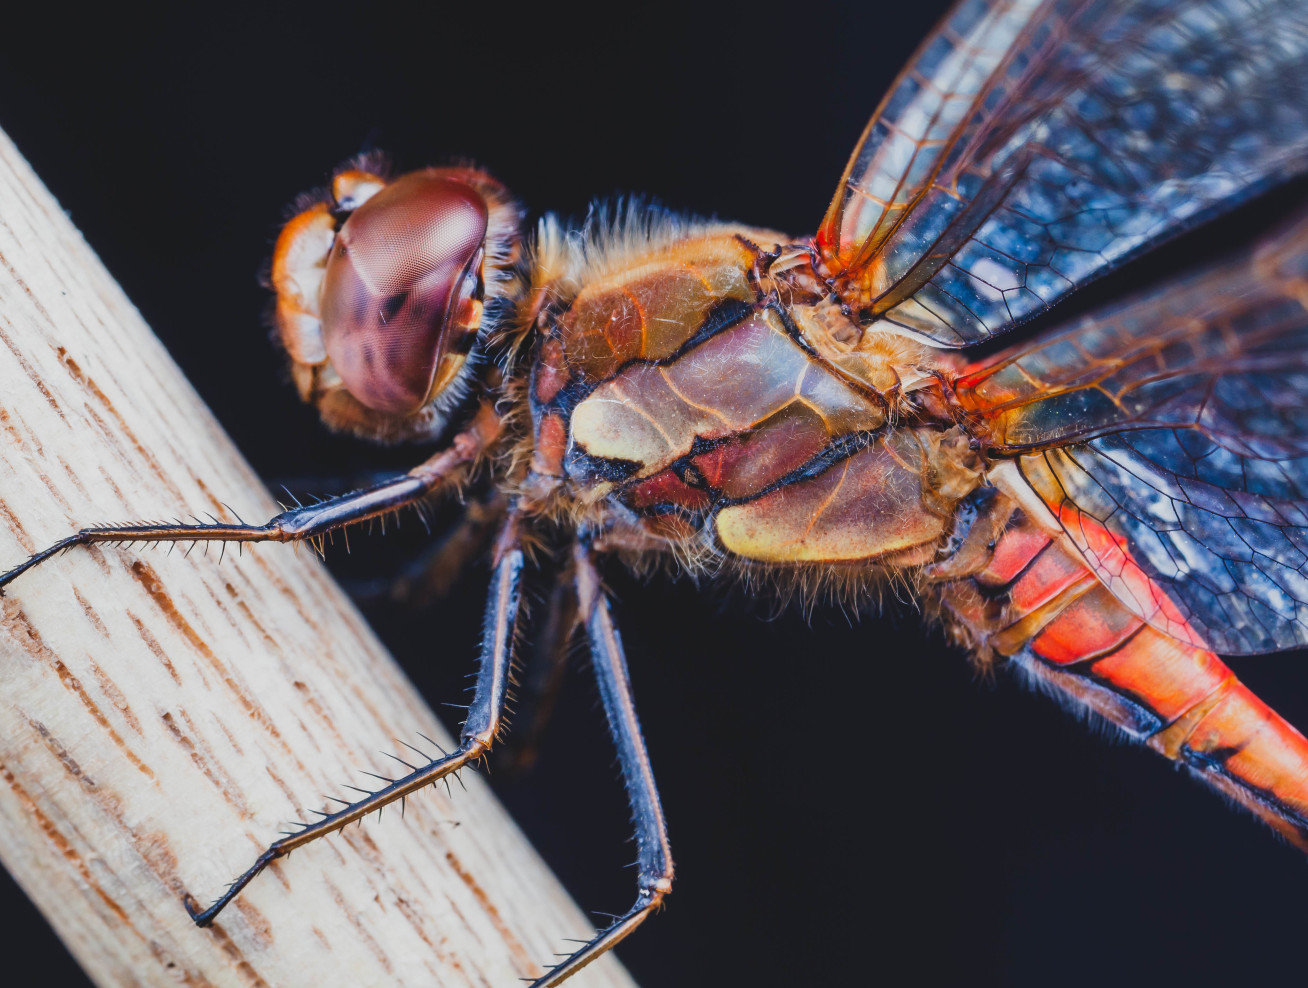 Close-up photo of the common darter dragonfly